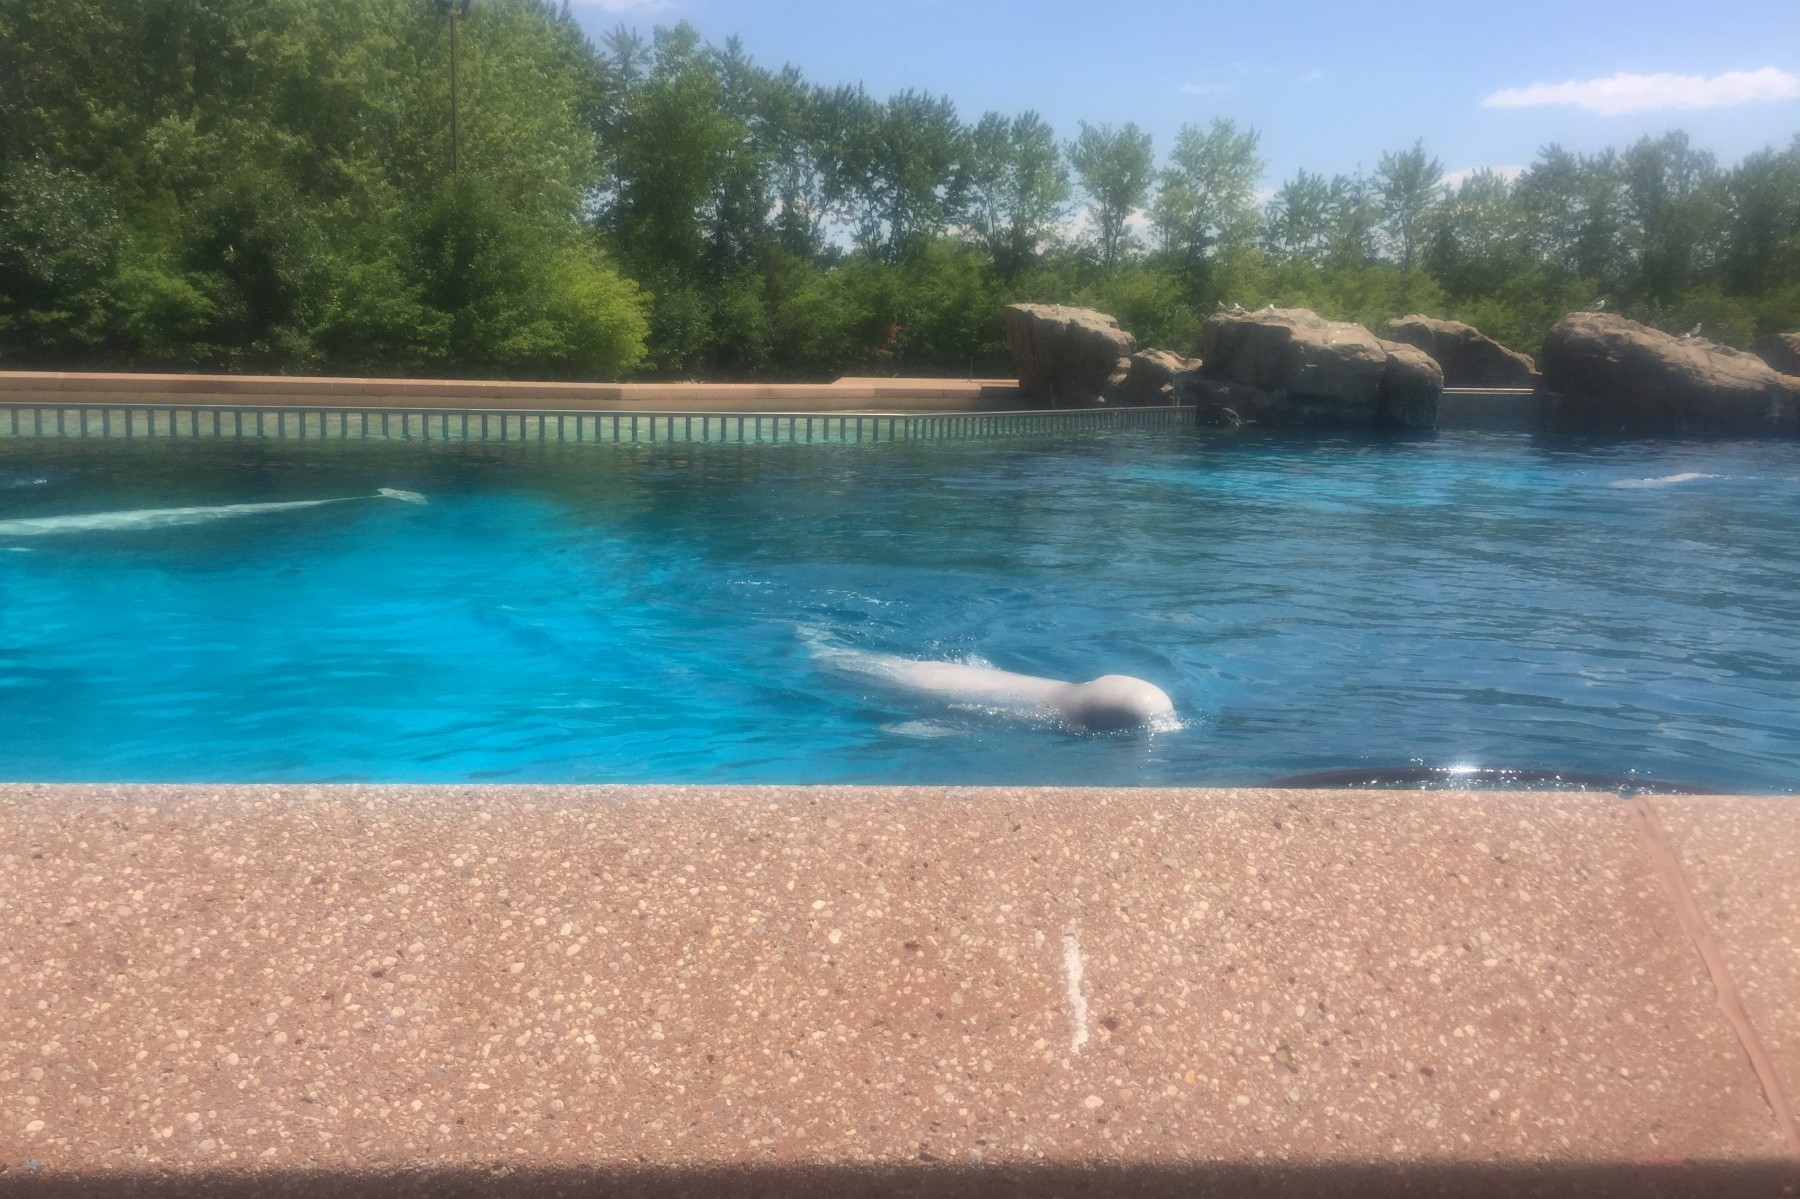 A beluga whale in a small tank at MarineLand in Ontario